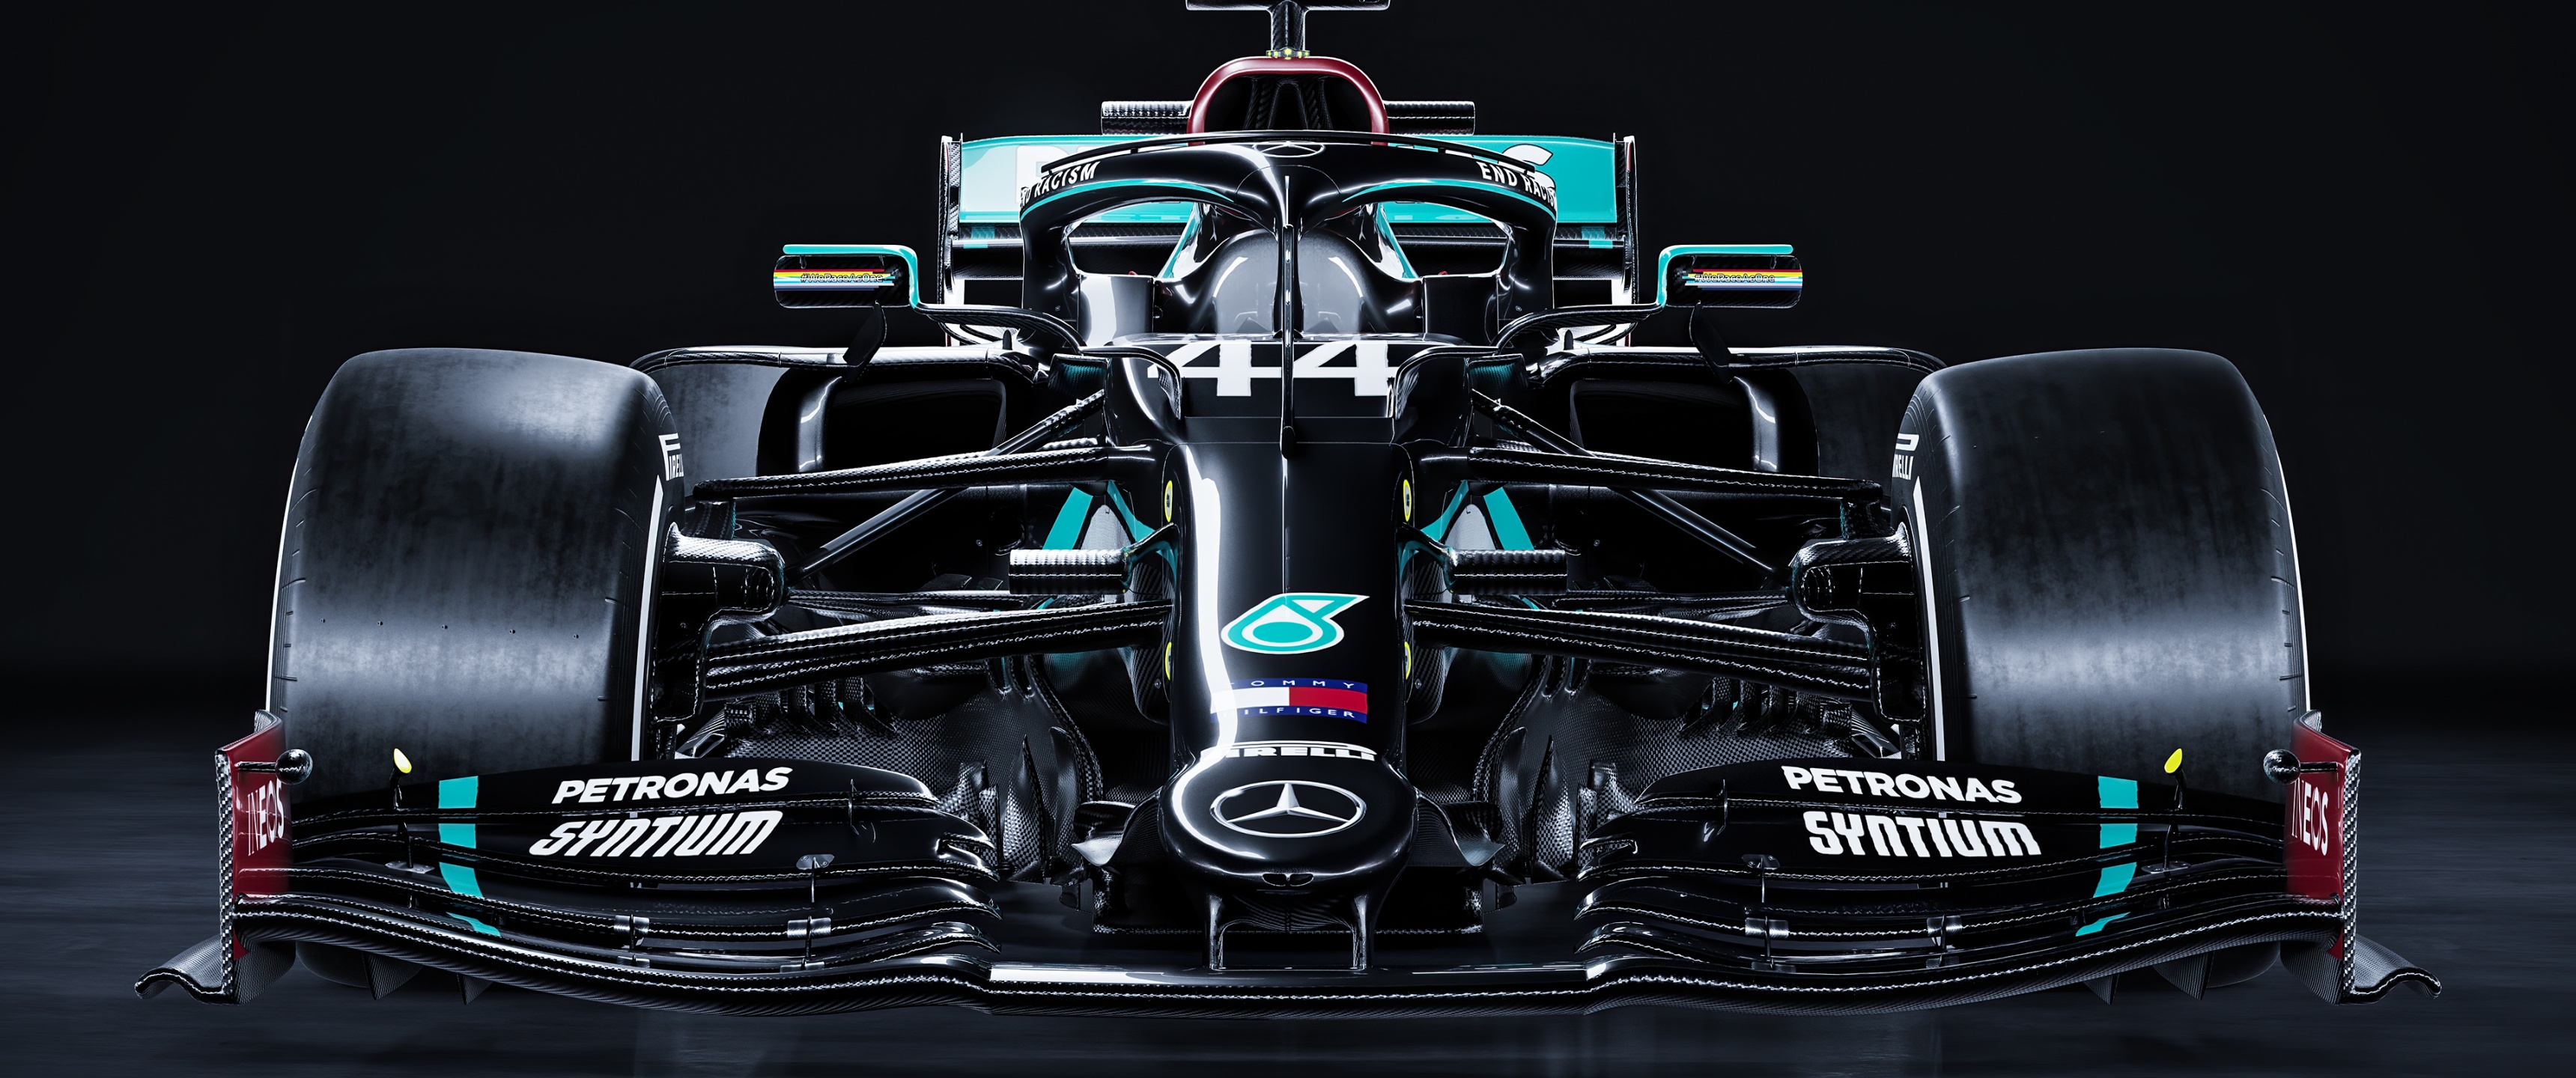 Download F1 wallpapers for mobile phone free F1 HD pictures